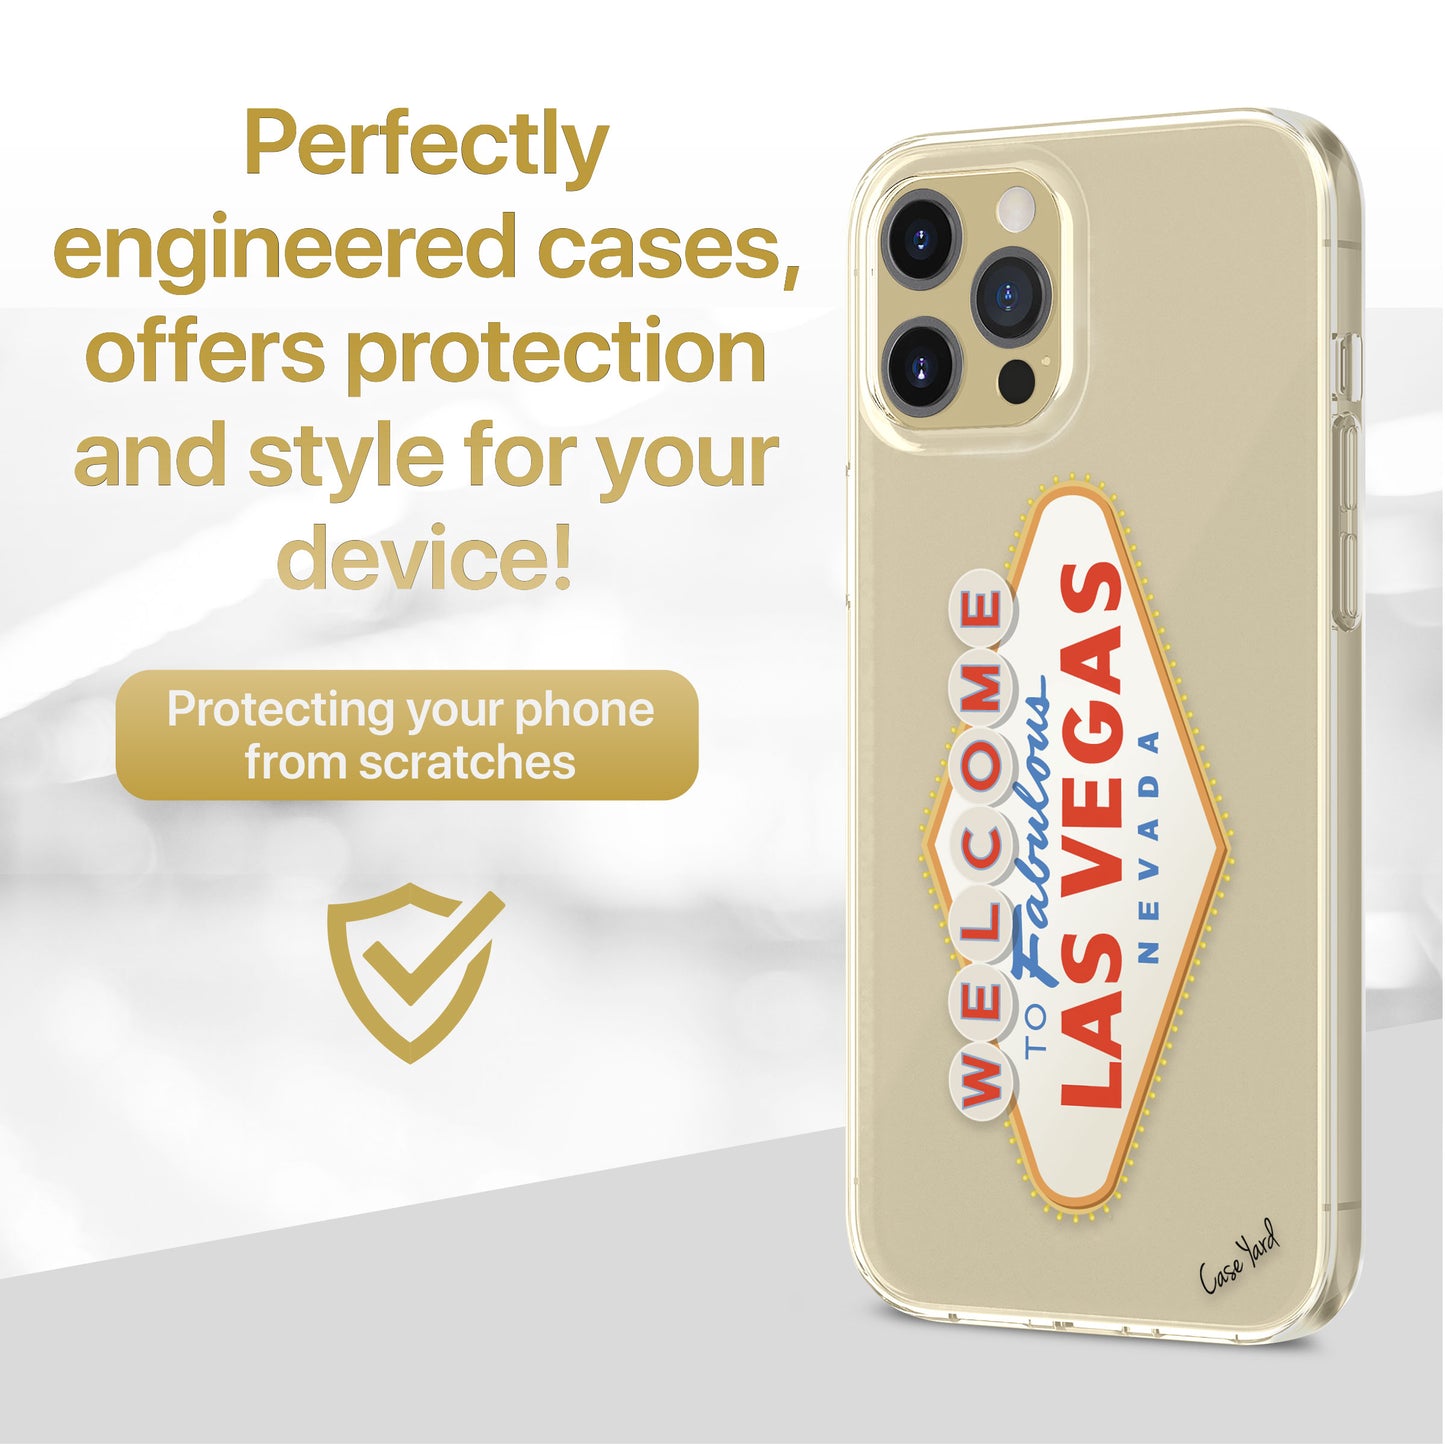 TPU Clear case with (Las Vegas Sign) Design for iPhone & Samsung Phones